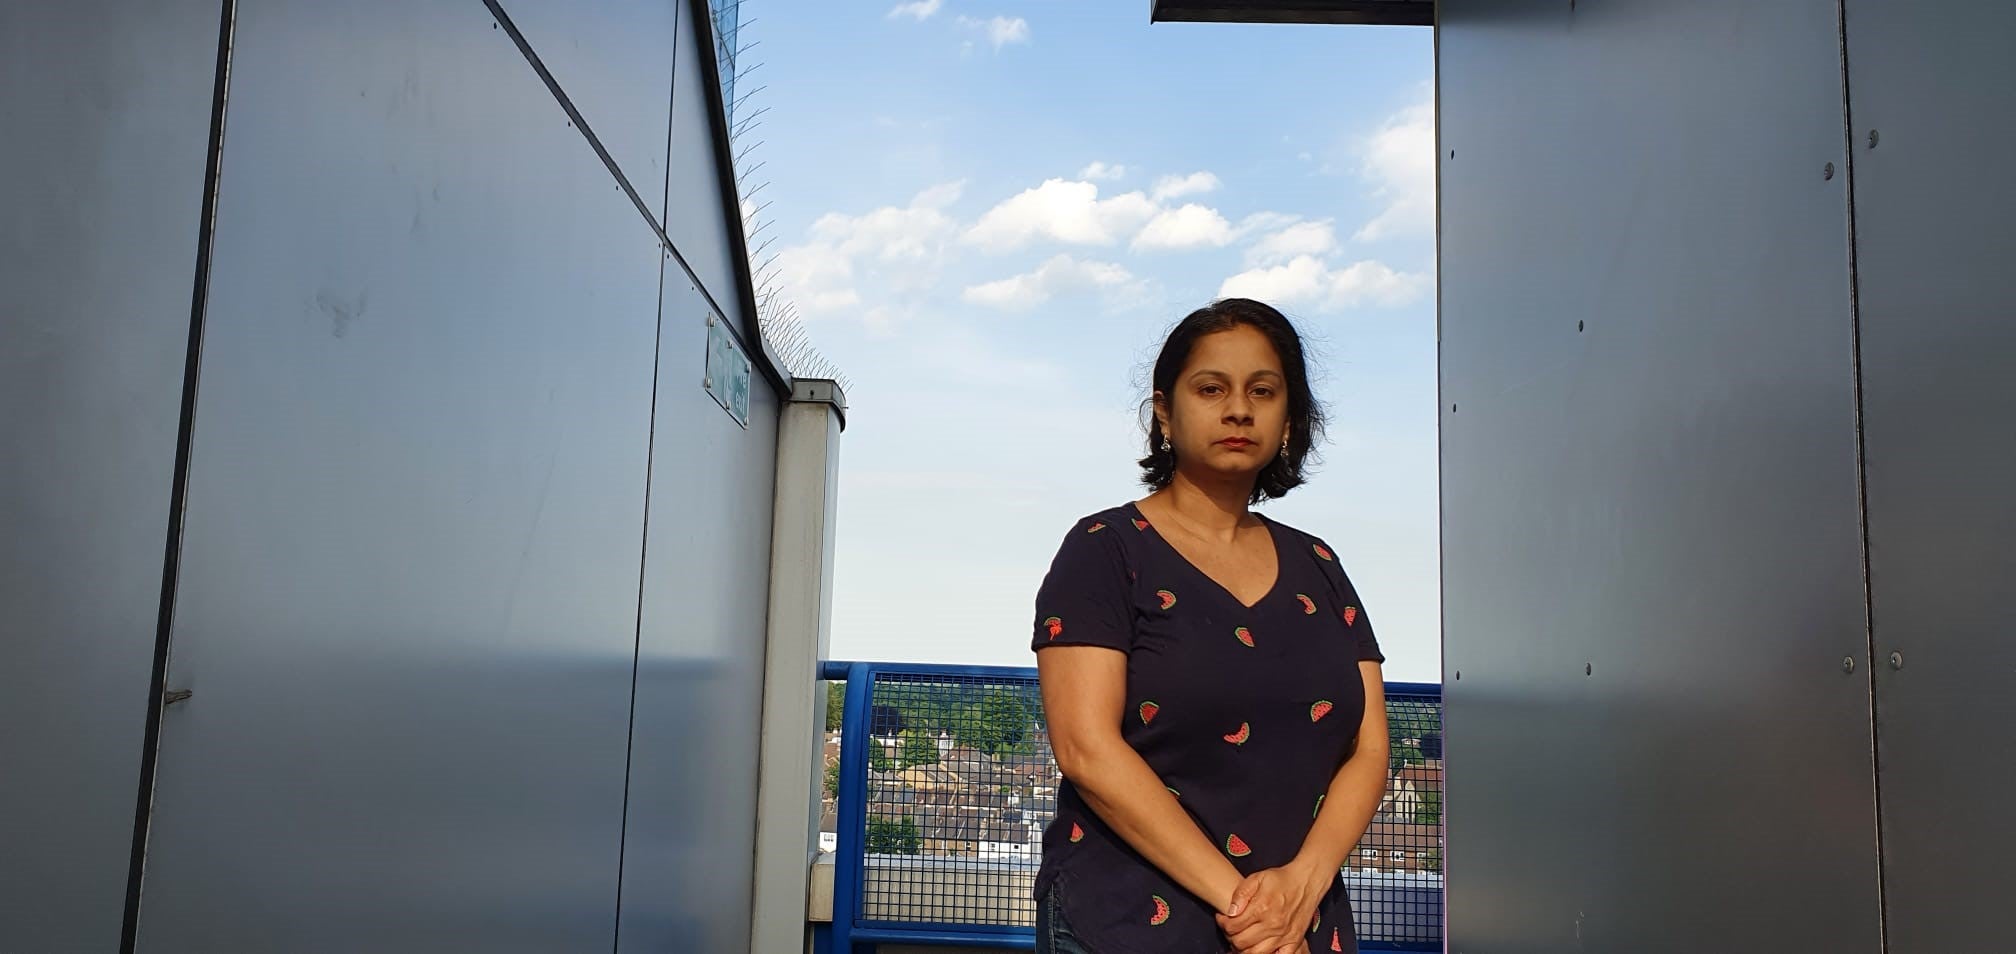 Ritu Saha was forced to form a voluntary waking watch team in her housing block after she discovered it was covered in Grenfell-style cladding (Ritu Saha)